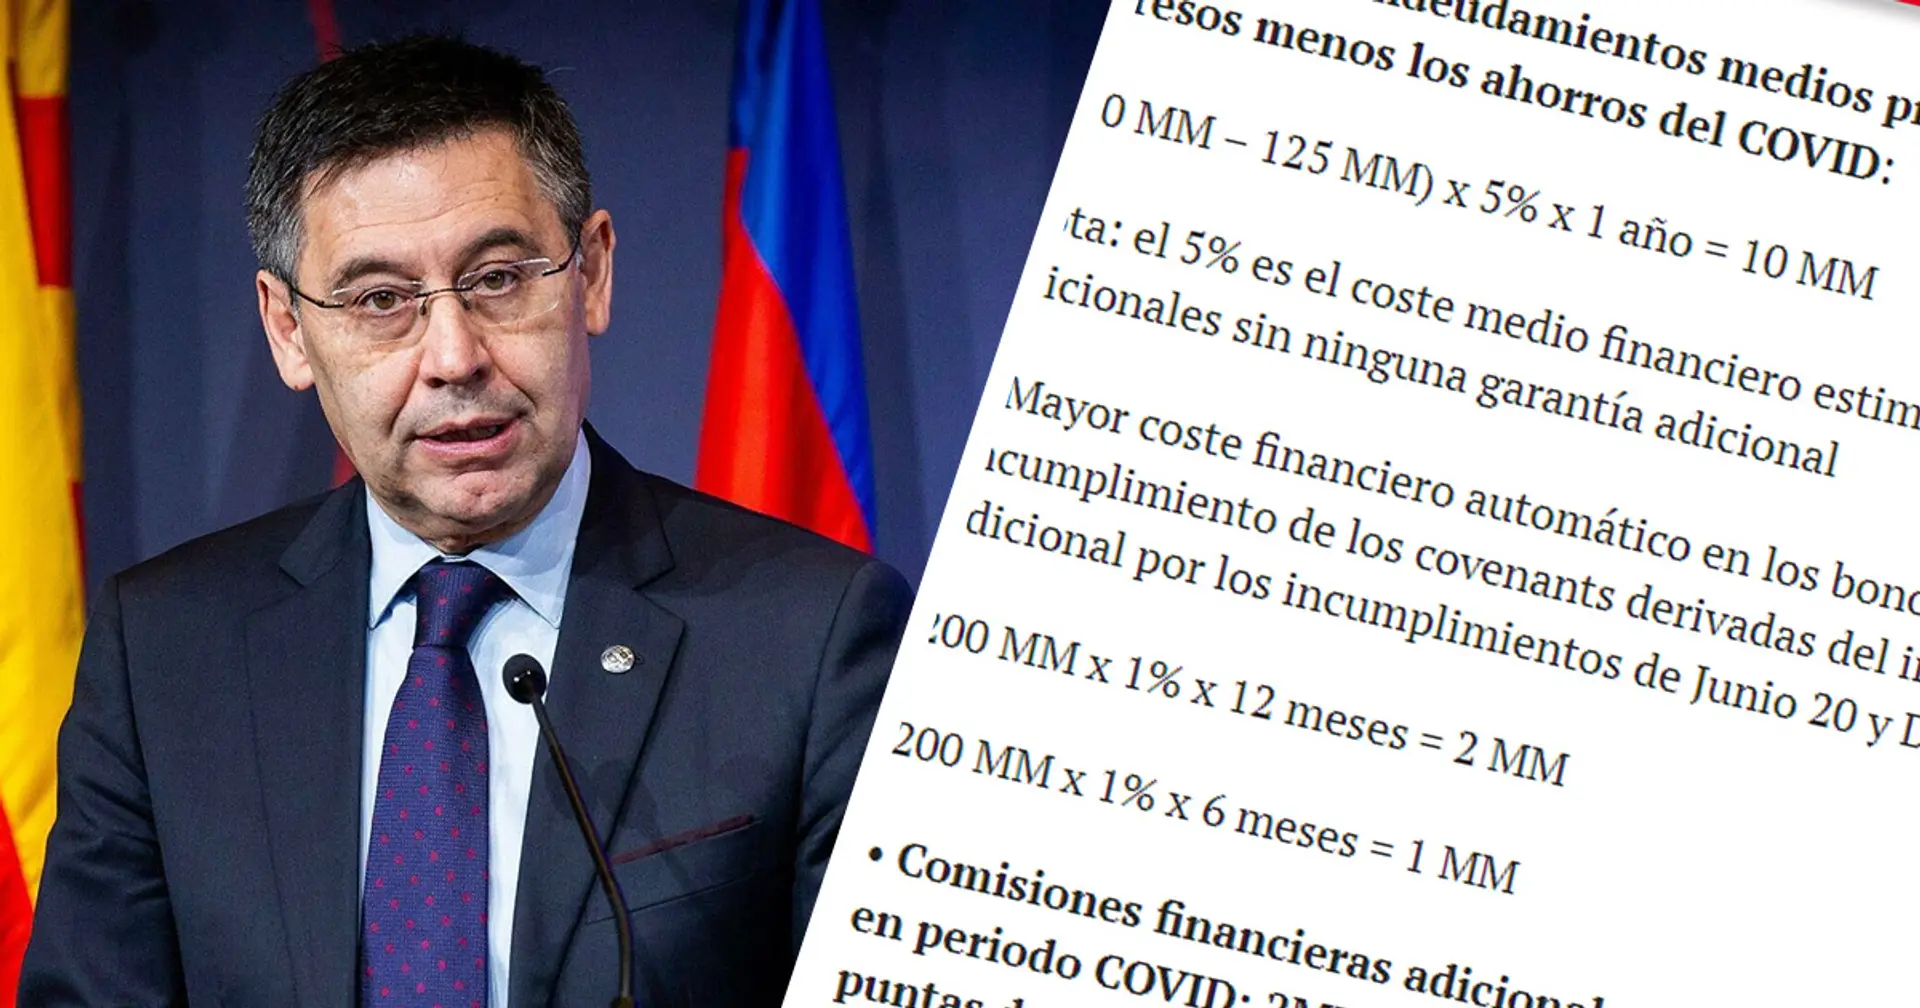 4 key claims as Bartomeu responds to board's accusations of poor management